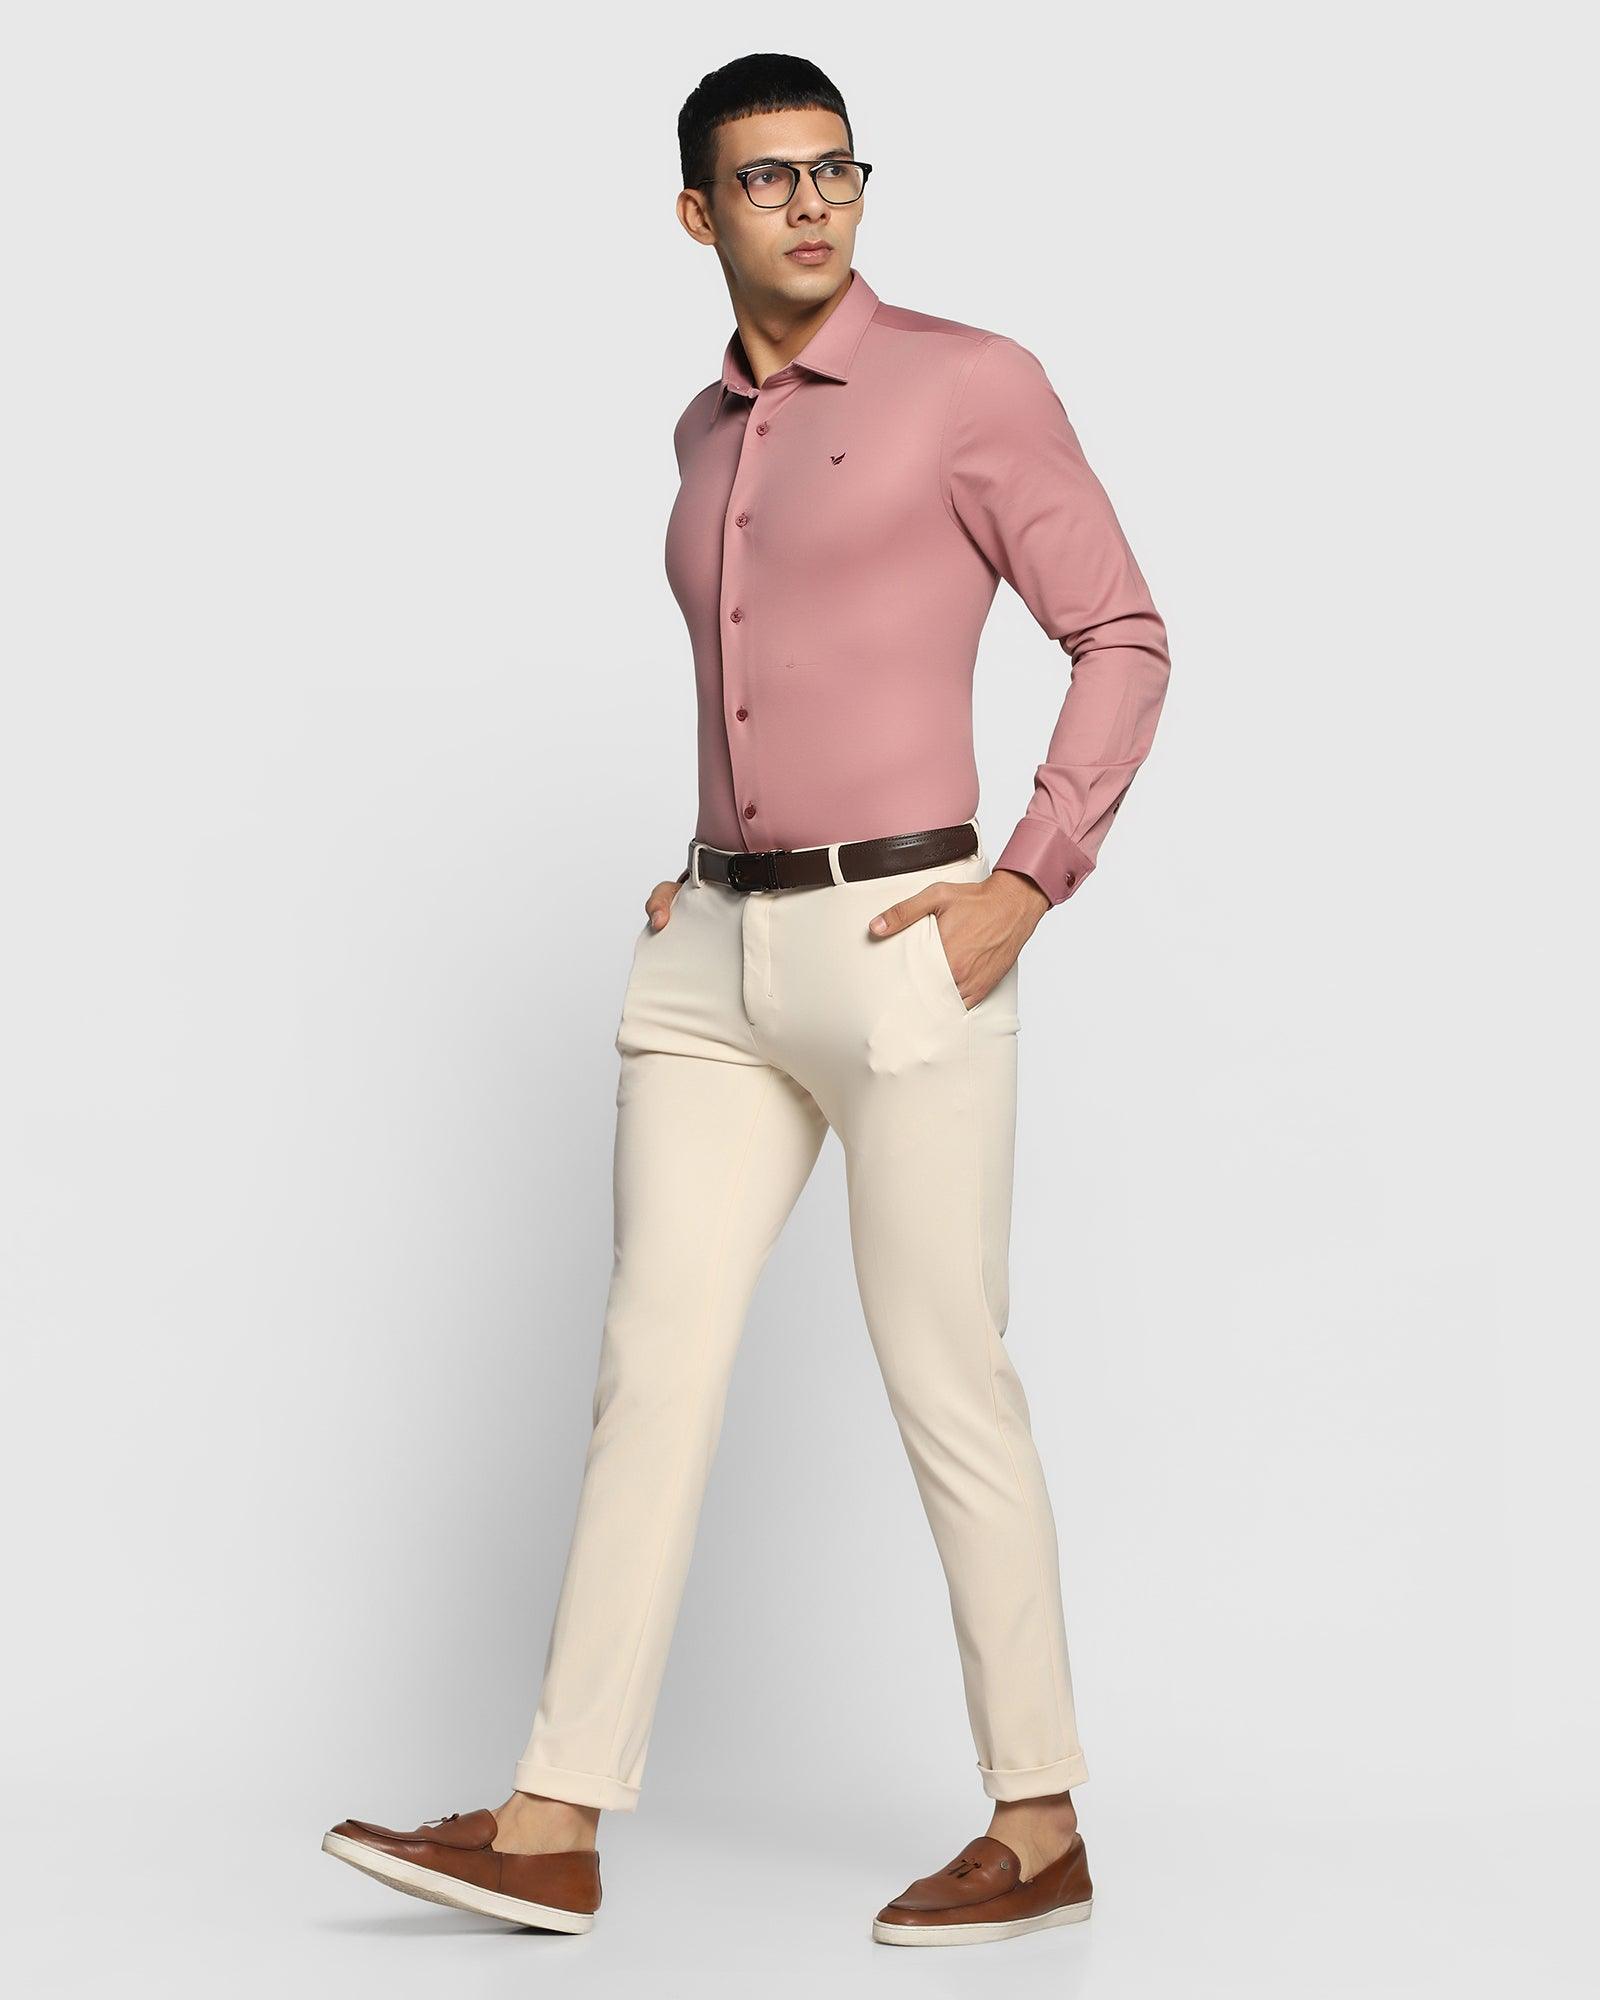 TechPro Formal Pink Solid Shirt - Payback